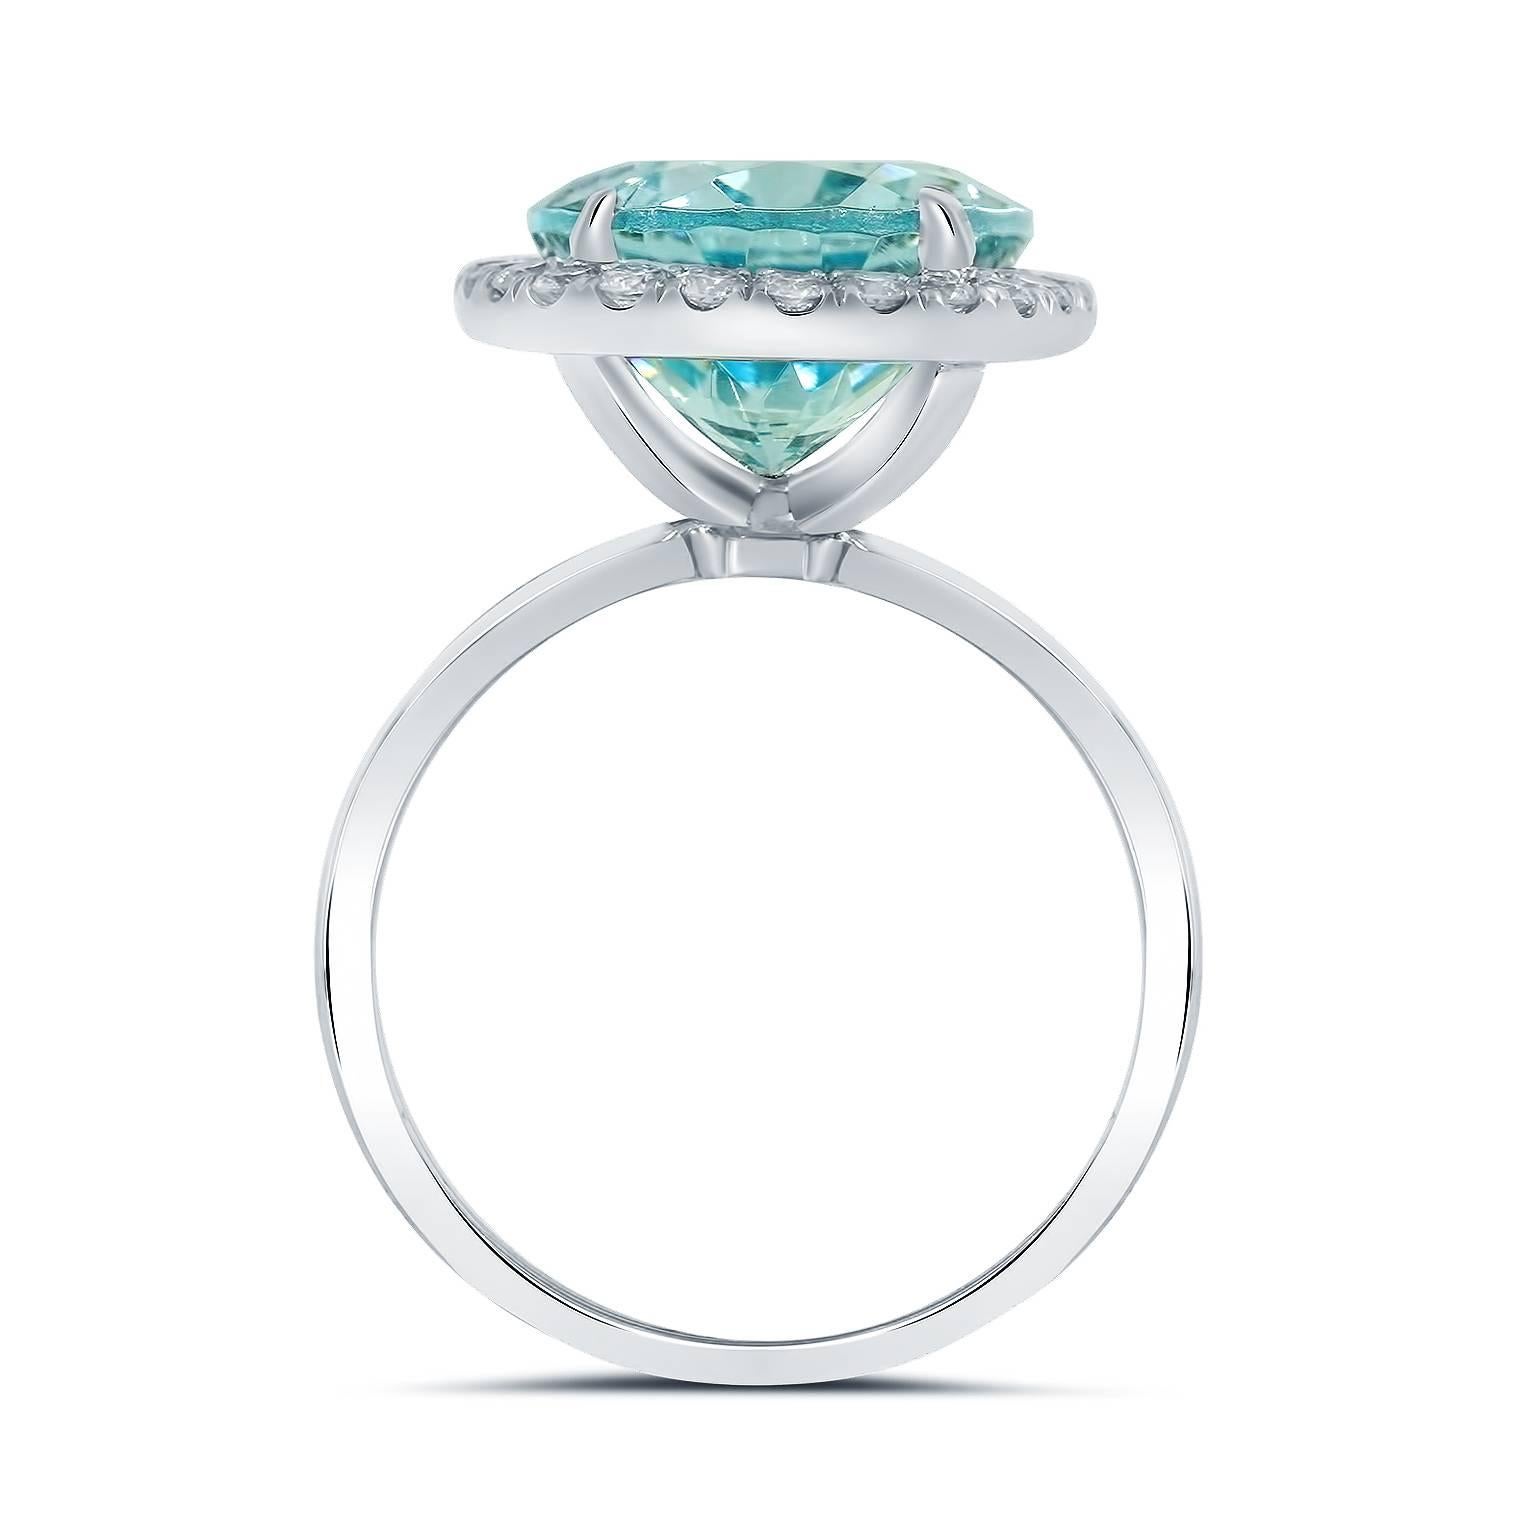 We present this striking, Aquamarine Halo Engagement Ring skillfully crafted from Platinum symbolizing everlasting love and commitment!

The center stone carried on this piece is a 5.37 carat Oval Shape Aquamarine Gemstone.

Accenting this